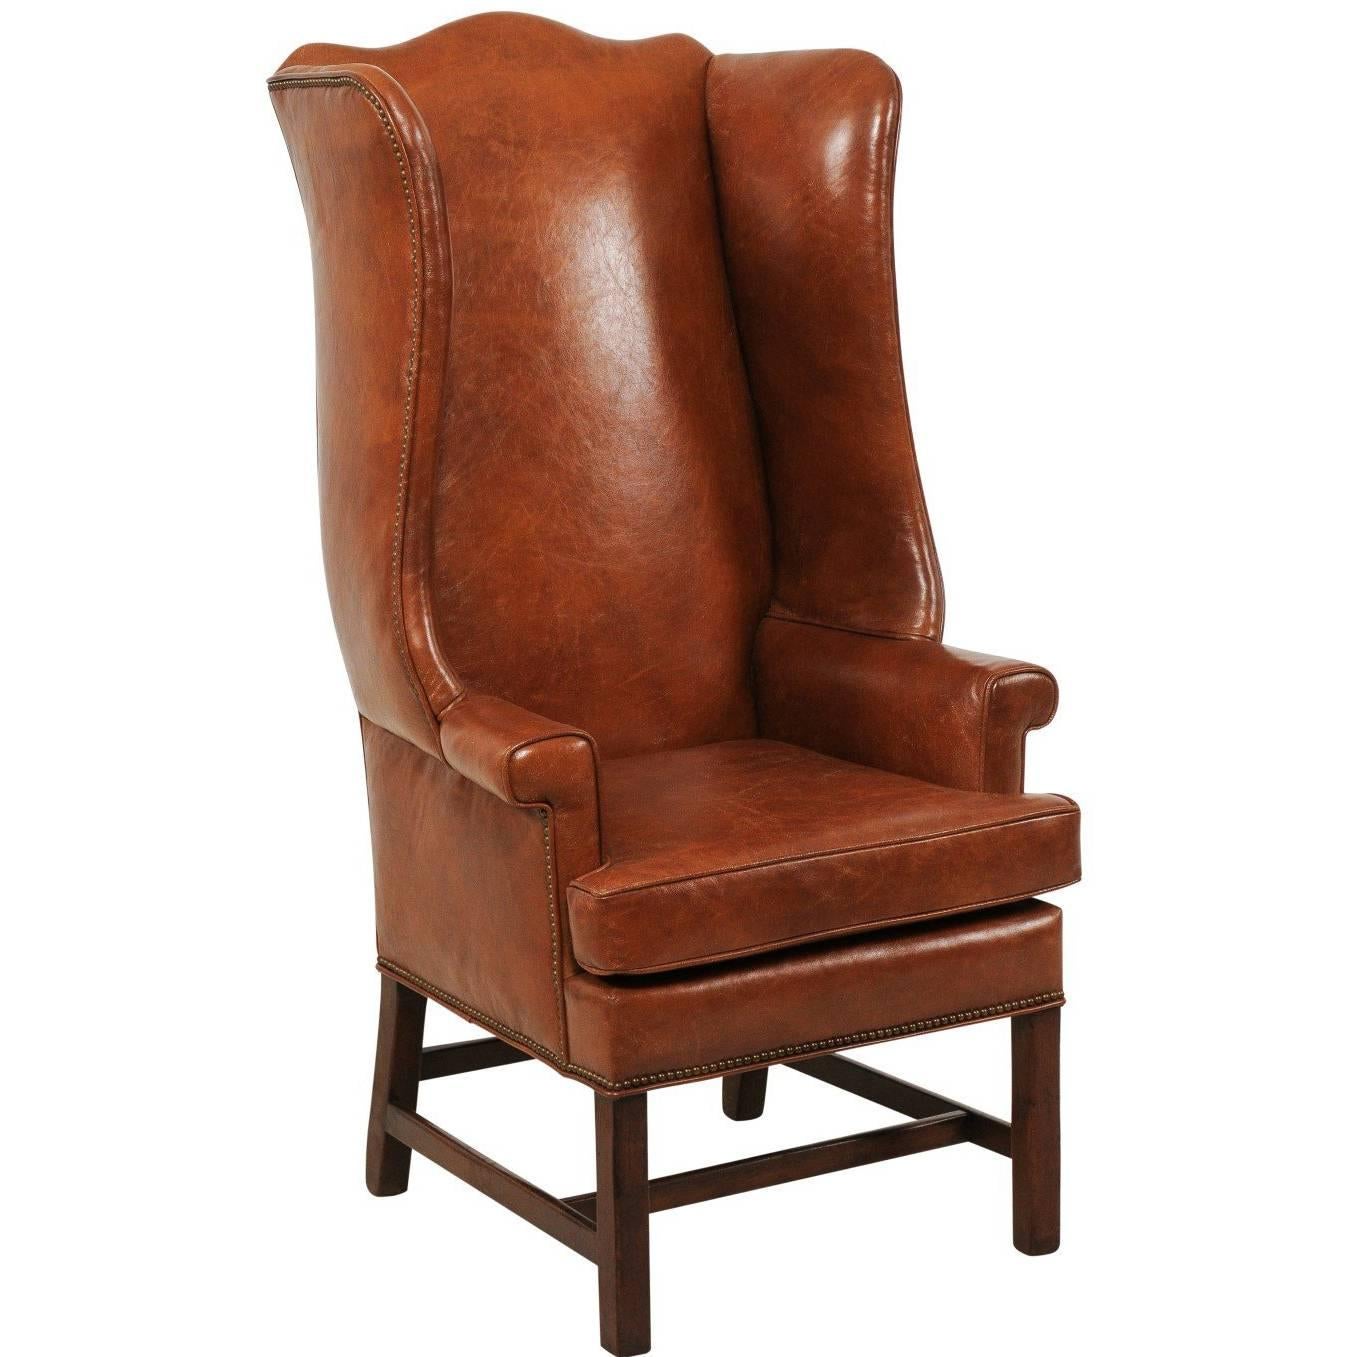 Midcentury Brown Leather Wingback Chair, Wing Back Leather Chairs